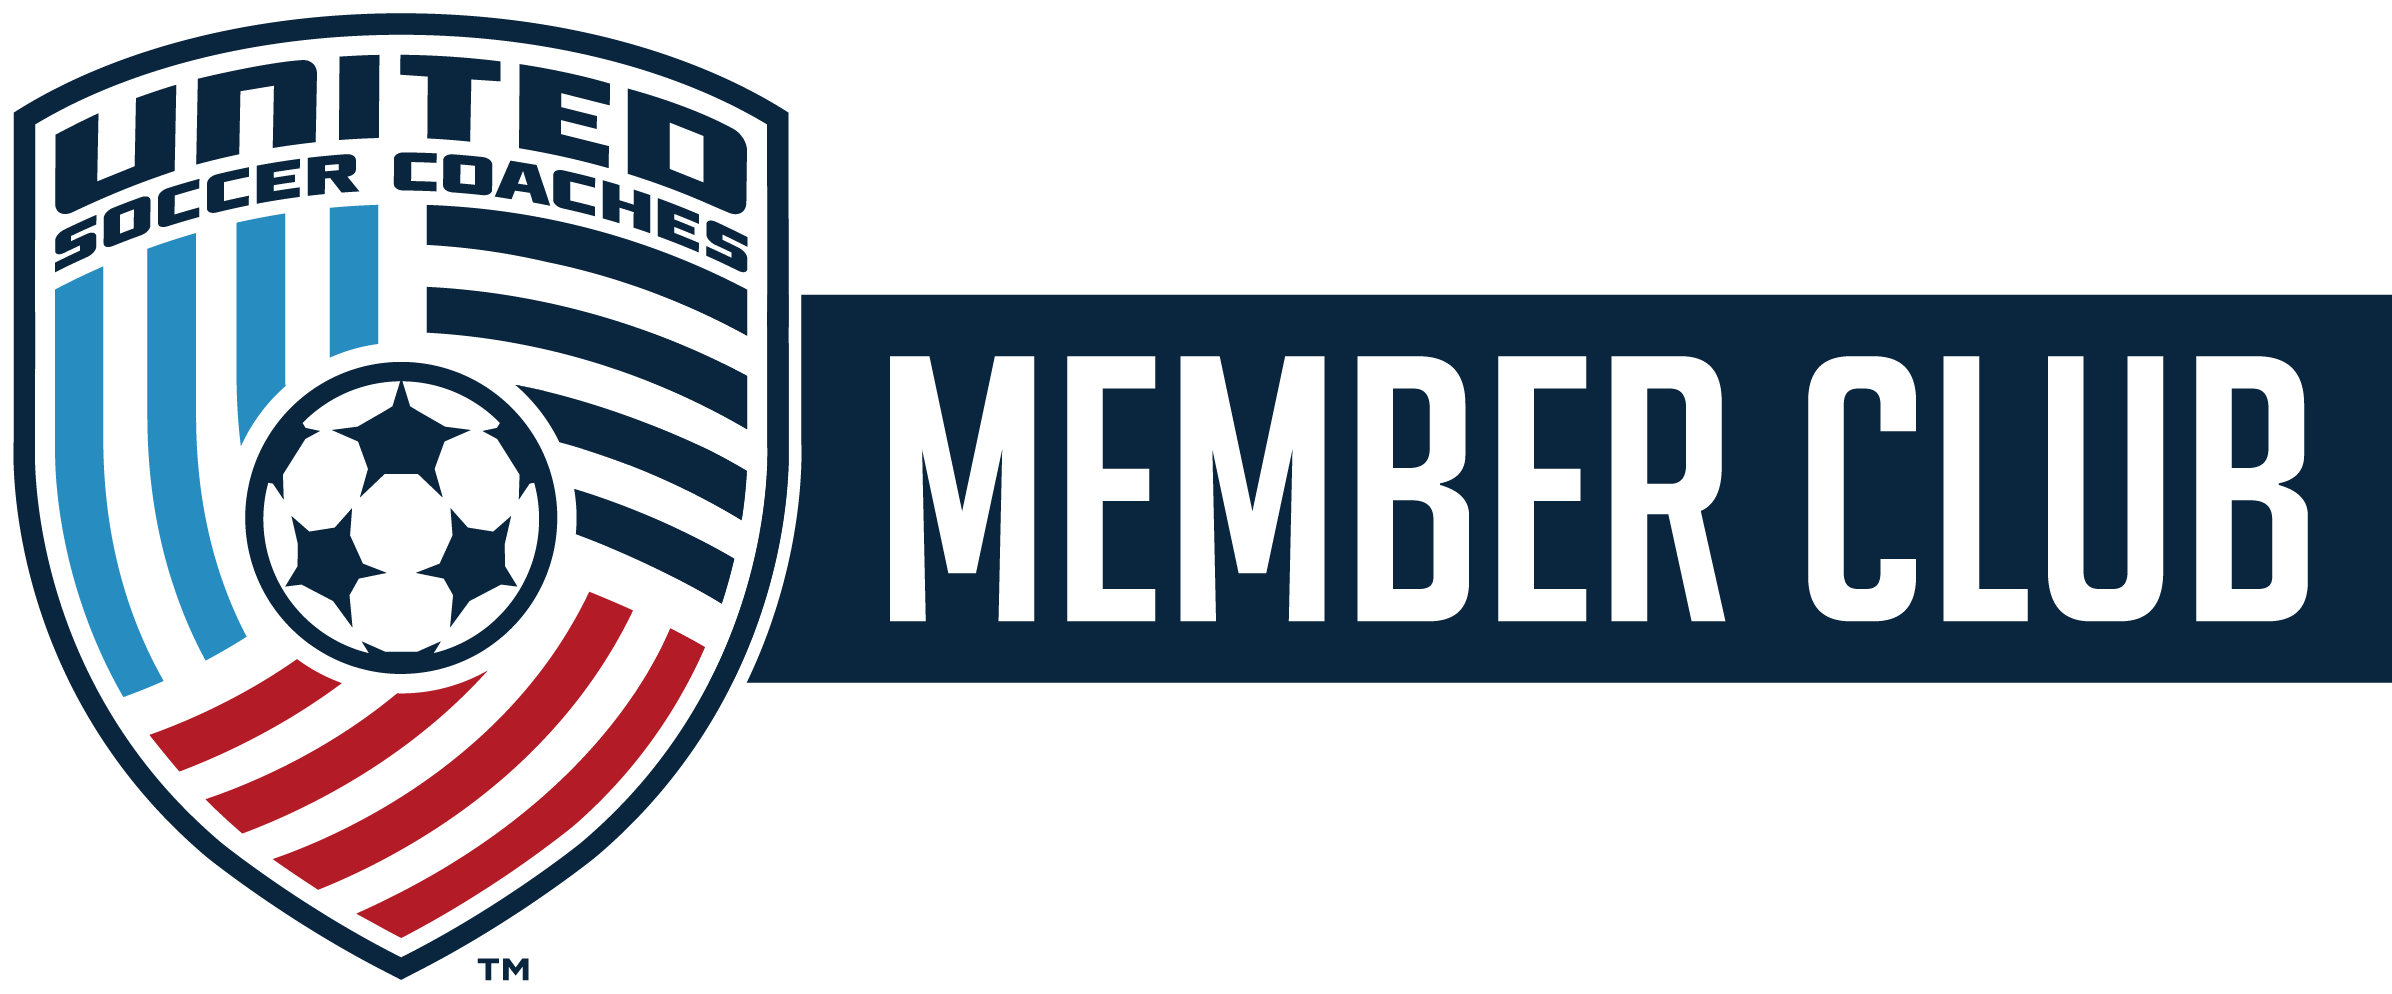 CRFC is a United Soccer Coaches Elite Member Club